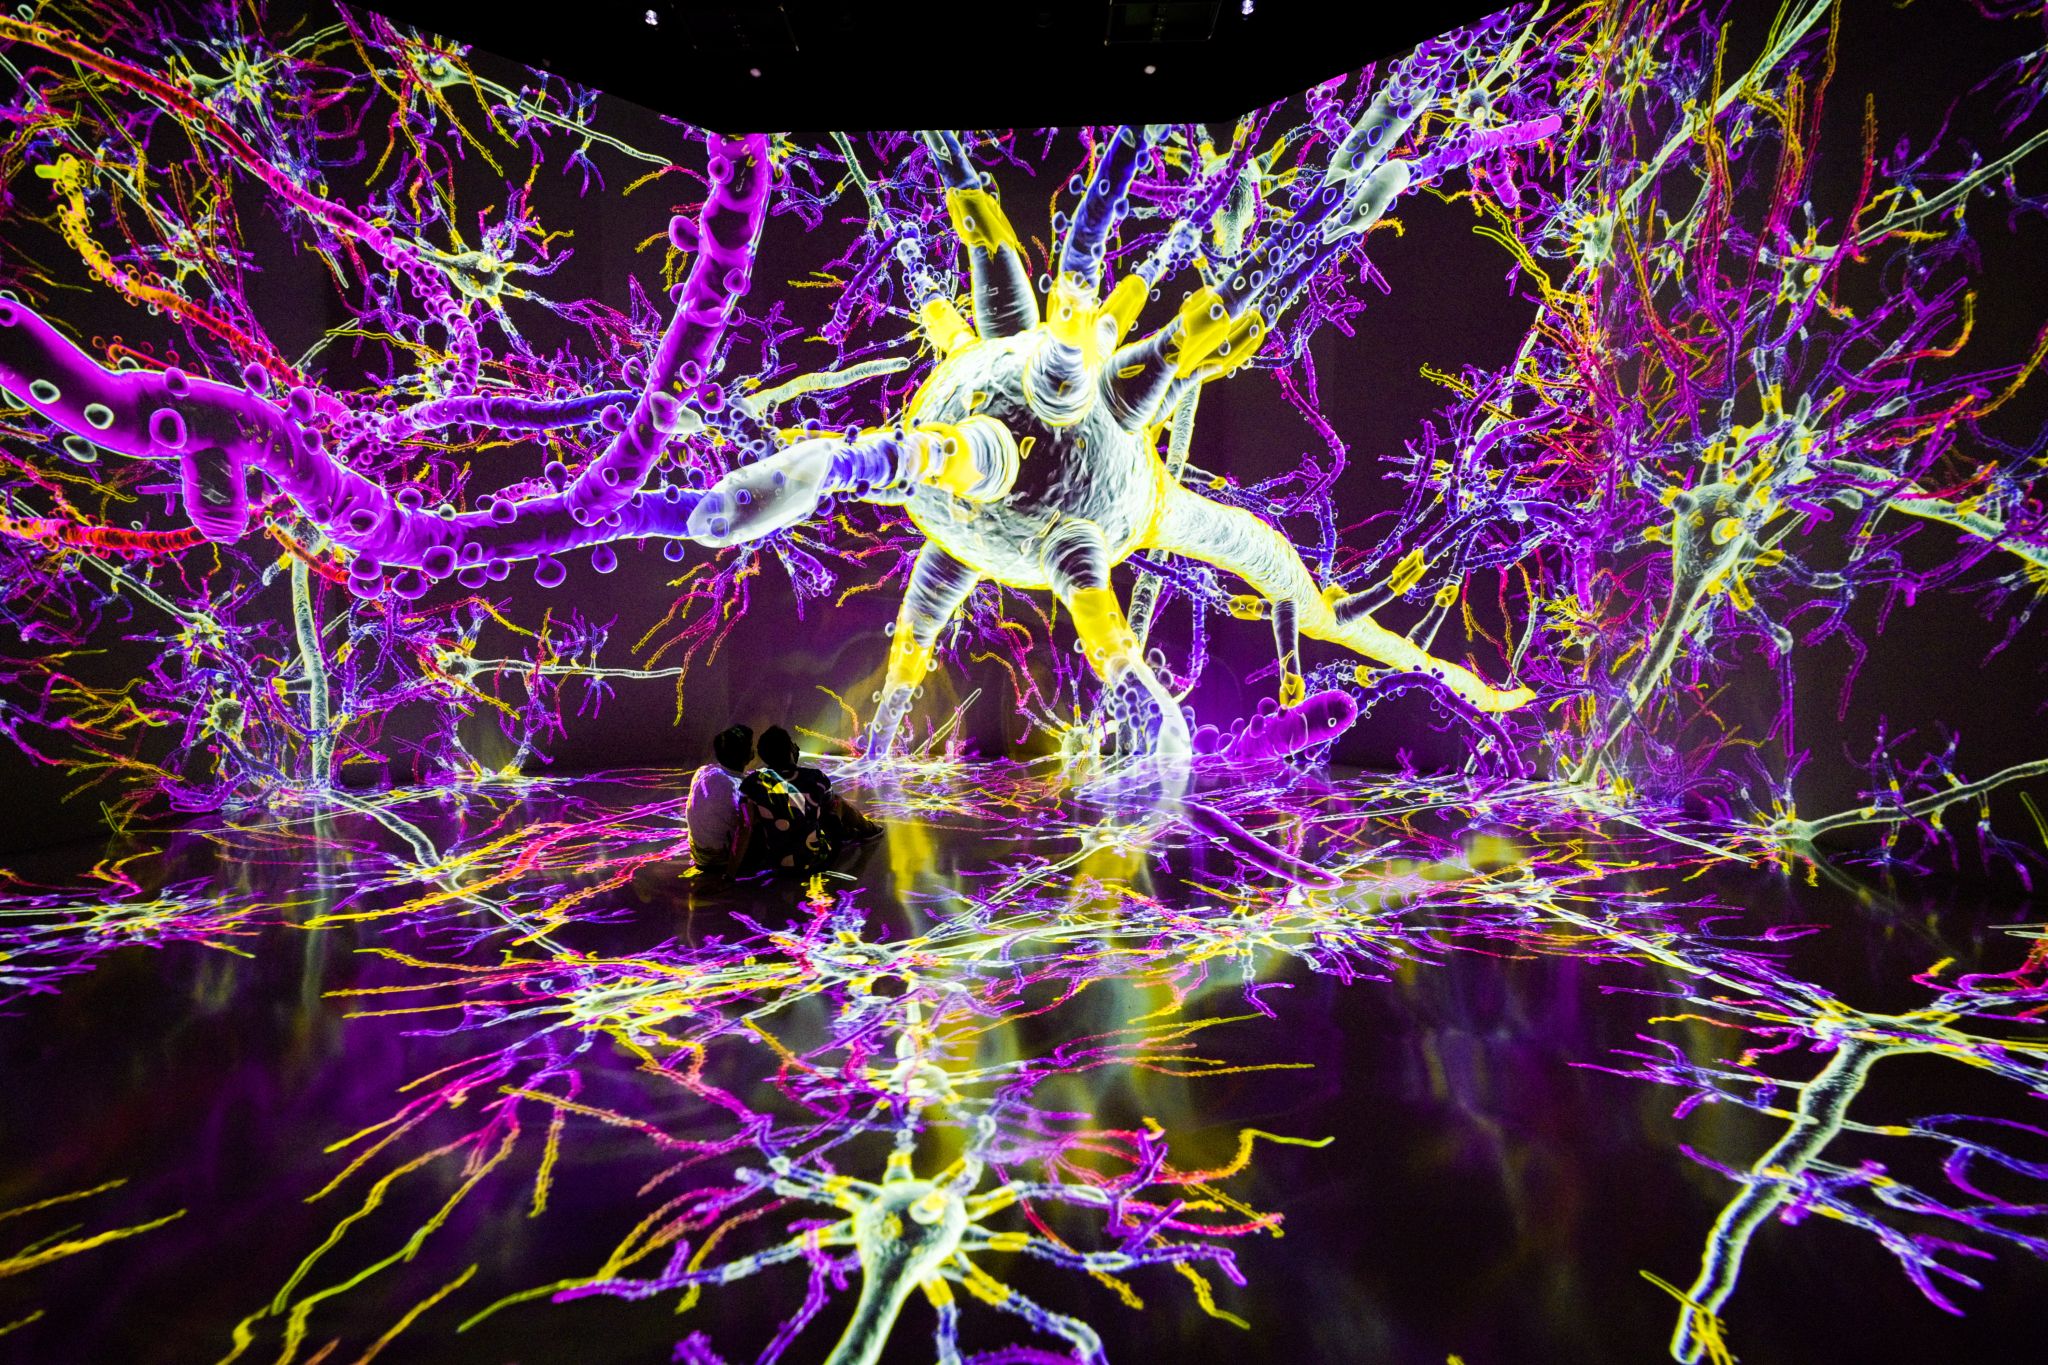 A Conversation on Curating: ARTECHOUSE’s ‘Life of a Neuron’